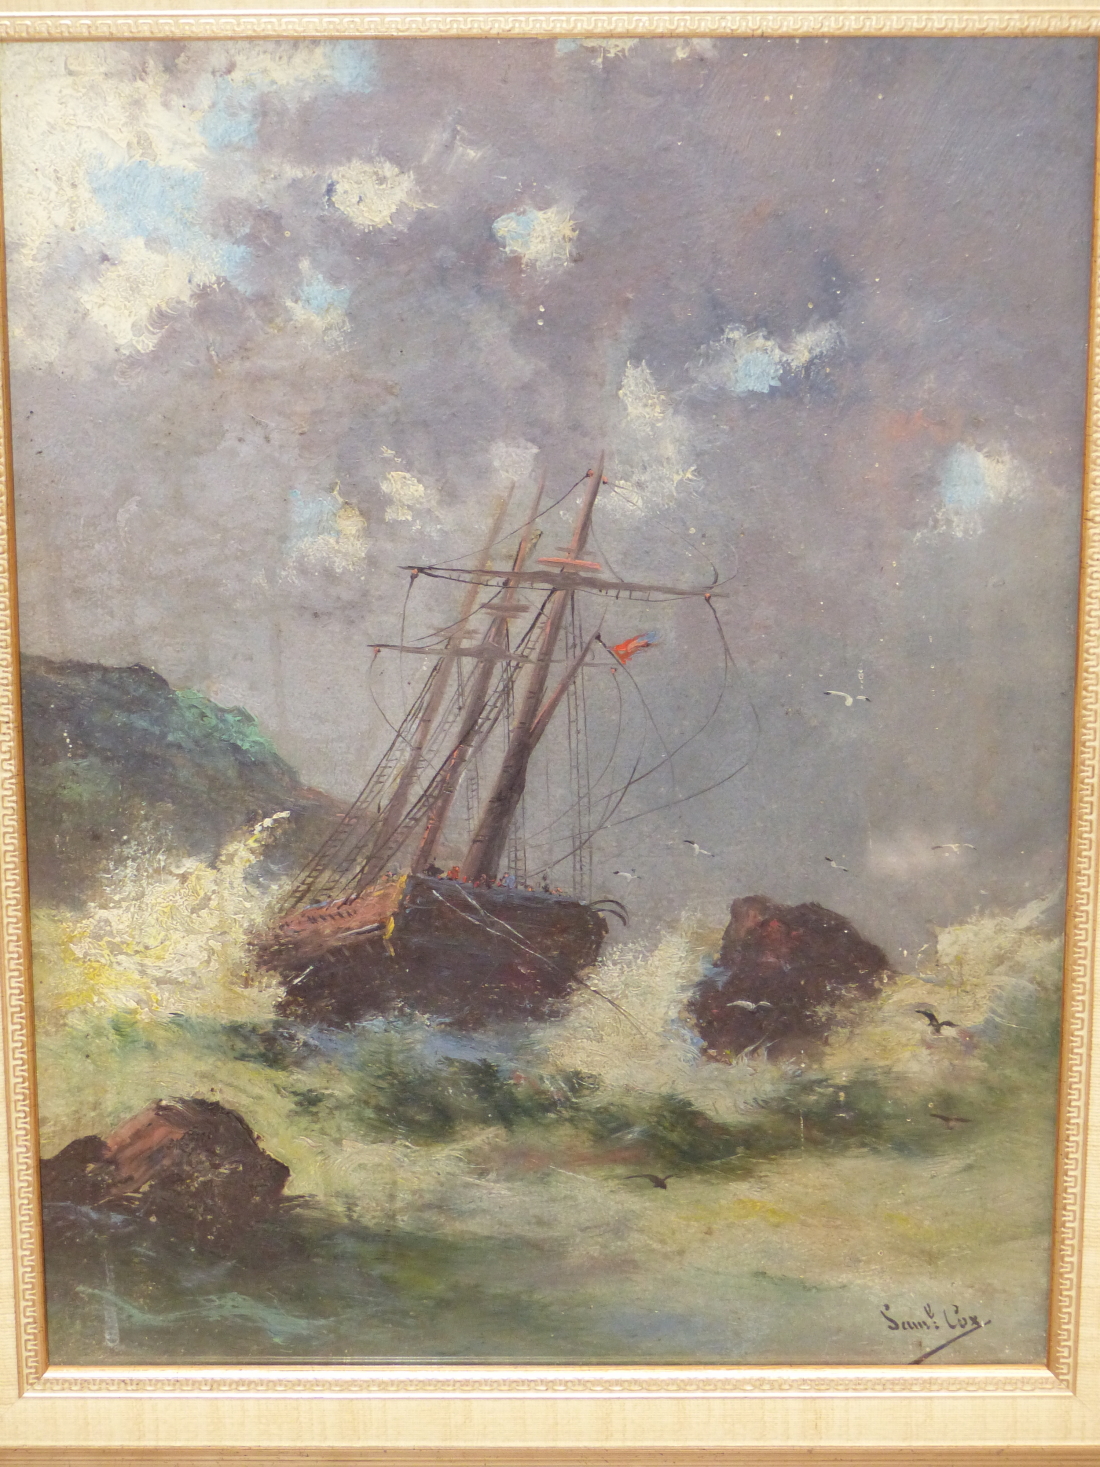 SAMUEL COX (EARLY 20TH CENTURY), A SHIP WRECK NEAR CLIFFS, AND COMPANION OF STORMY SEAS, SIGNED, - Image 4 of 8